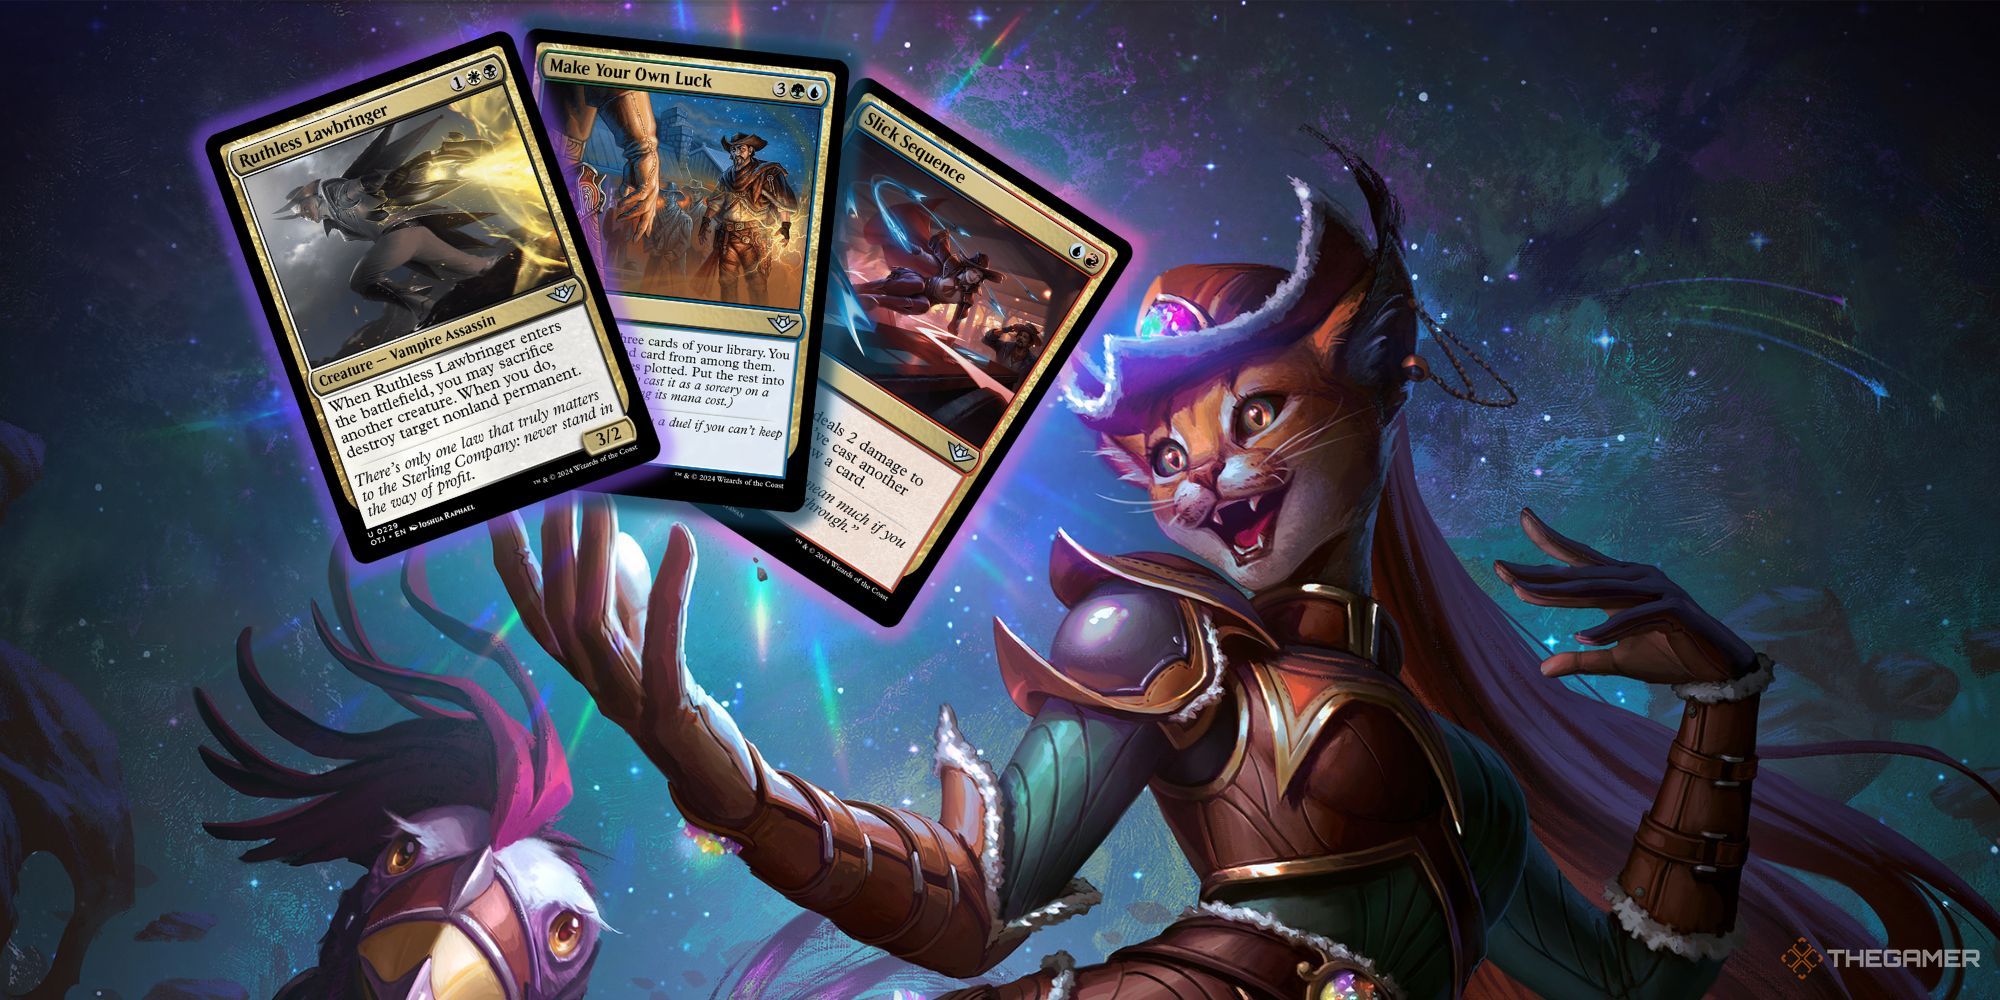 Magic: The Gathering card art of Roxanne, Starfall Savant holding card images of Ruthless Lawbringer, Make Your Own Luck, and Slick Sequence